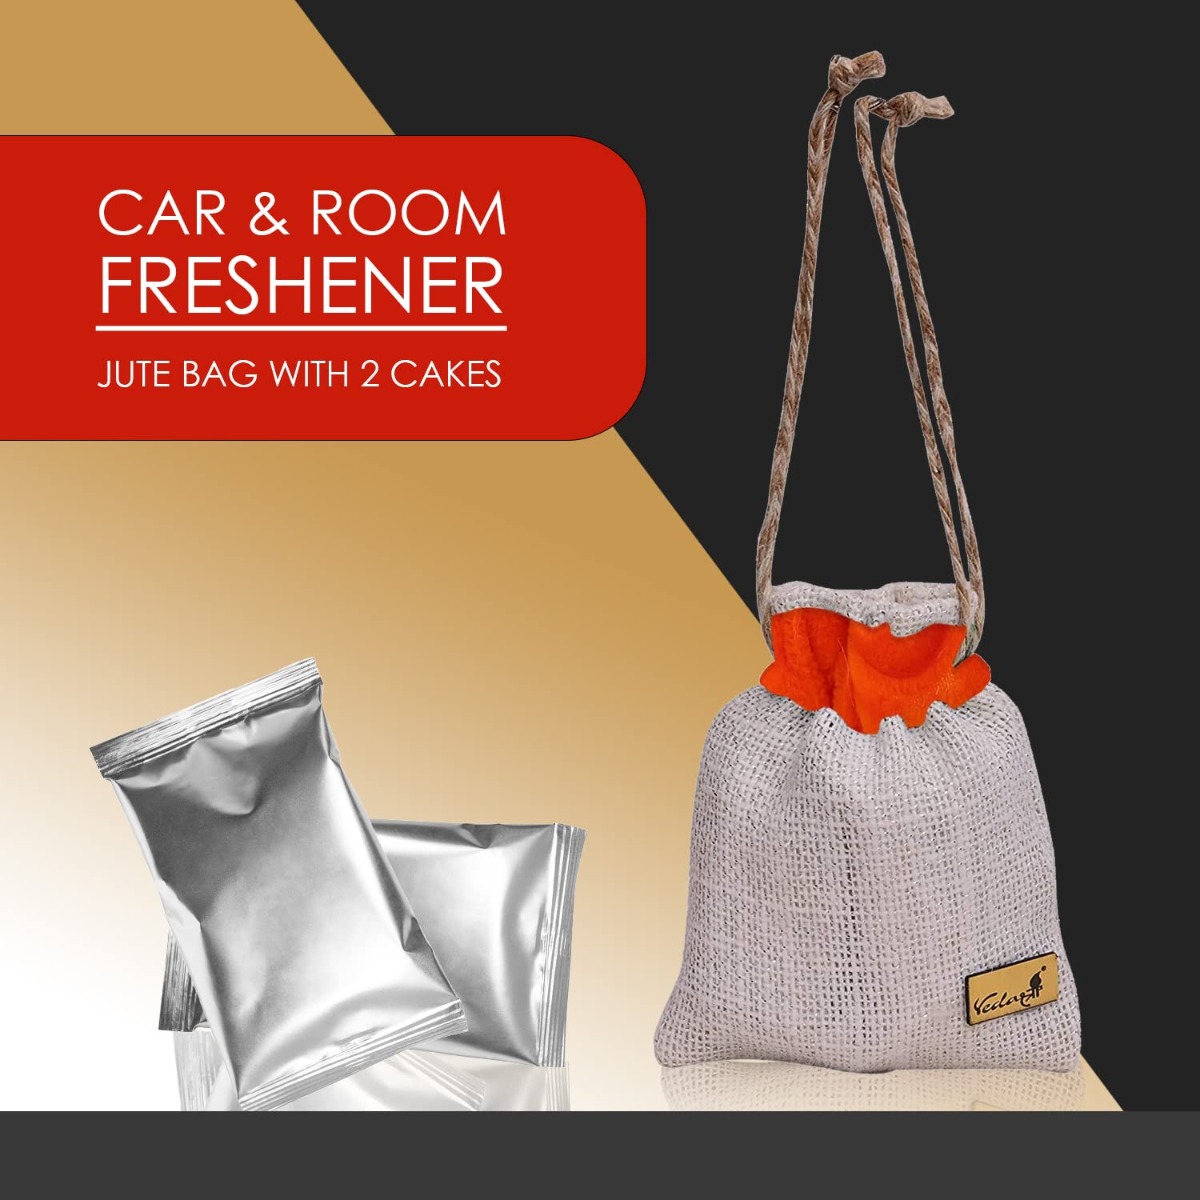 28 Air Freshener Coffee Bag Images, Stock Photos, 3D objects, & Vectors |  Shutterstock